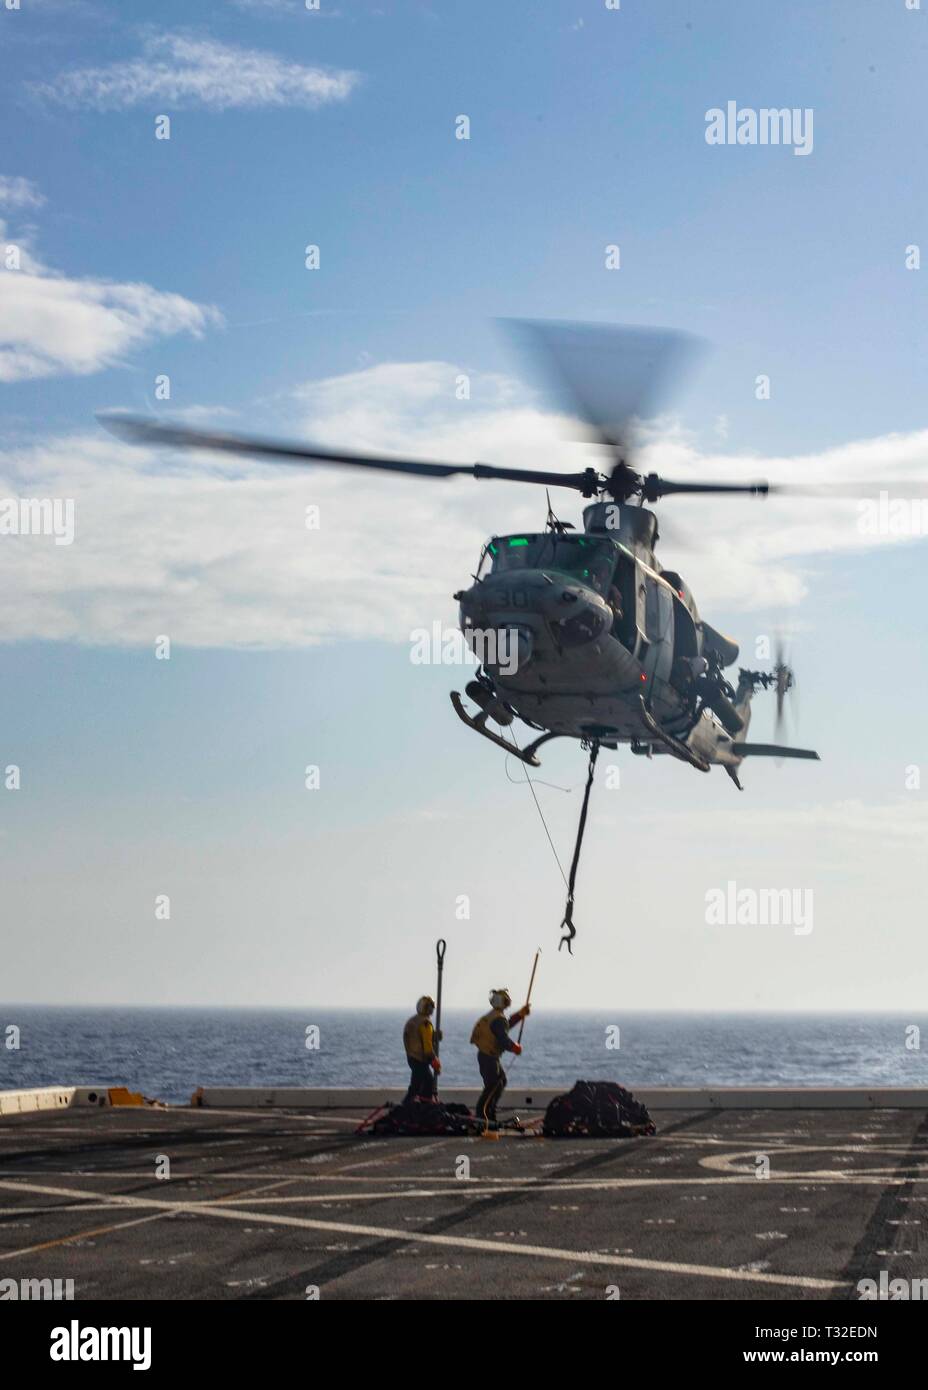 190401-N-HG389-0069 MEDITERRANEAN SEA (April 1, 2019) Sailors practice attaching pallets to a UH-1Y Huey helicopter assigned to the “Black Knights” of Marine Medium Tiltrotor Squadron (VMM) 264 (Reinforced) aboard the San Antonio-class amphibious transport dock ship USS Arlington (LPD 24), April 1, 2019. Arlington is on a scheduled deployment as part of the Kearsarge Amphibious Ready Group in support of maritime security operations, crisis response and theater security cooperation, while also providing a forward naval presence. (U.S. Navy photo by Mass Communication Specialist 2nd Class Brando Stock Photo